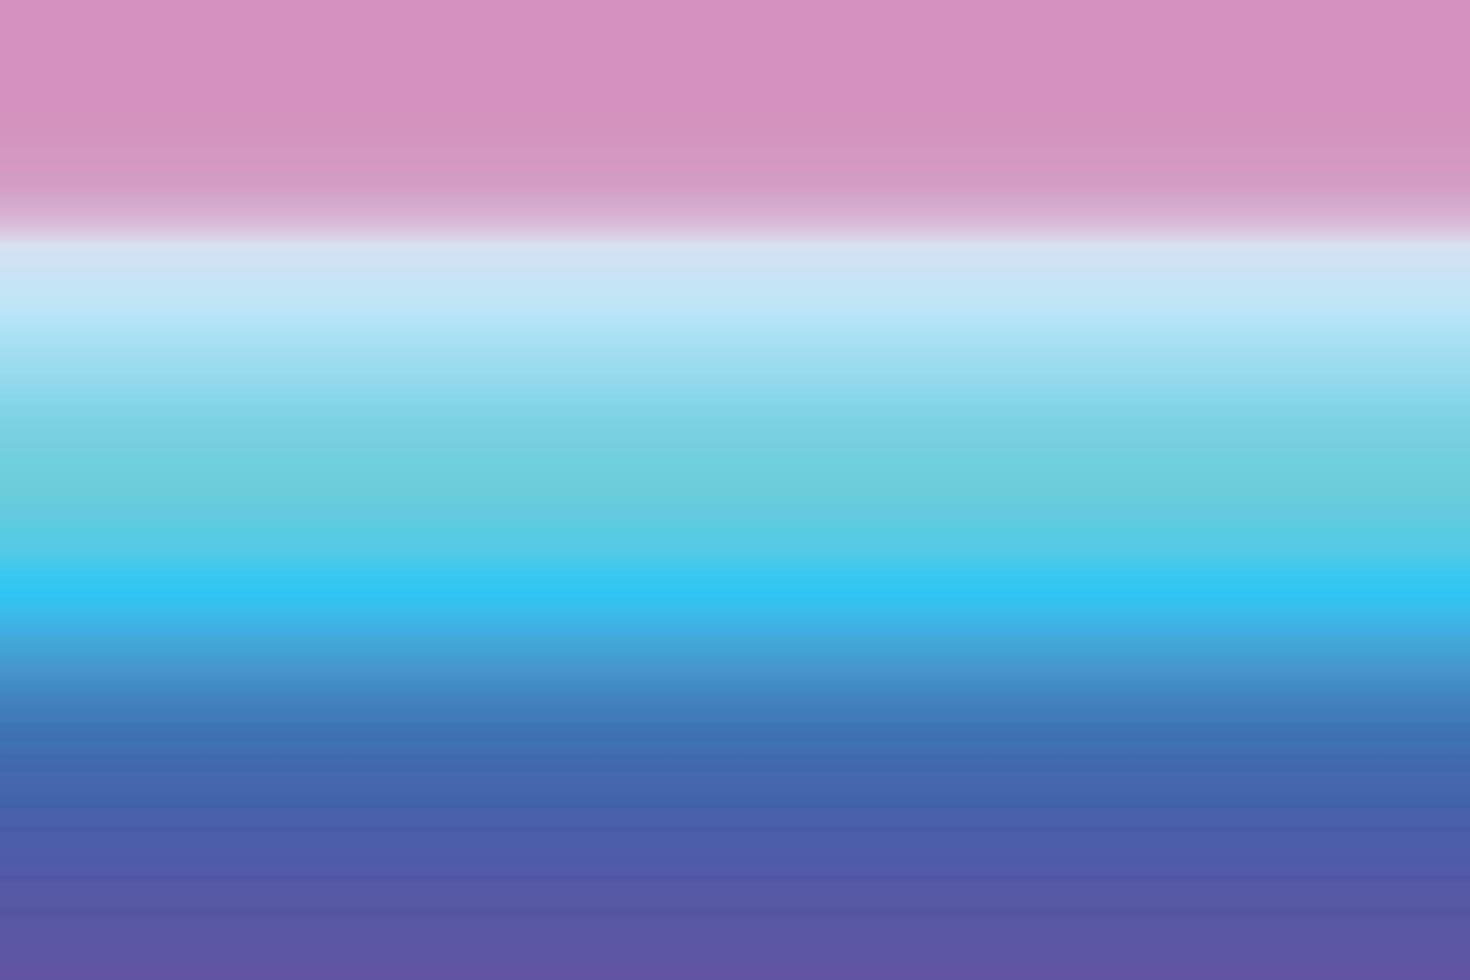 Dreamy blurred gradient aesthetic background. vector